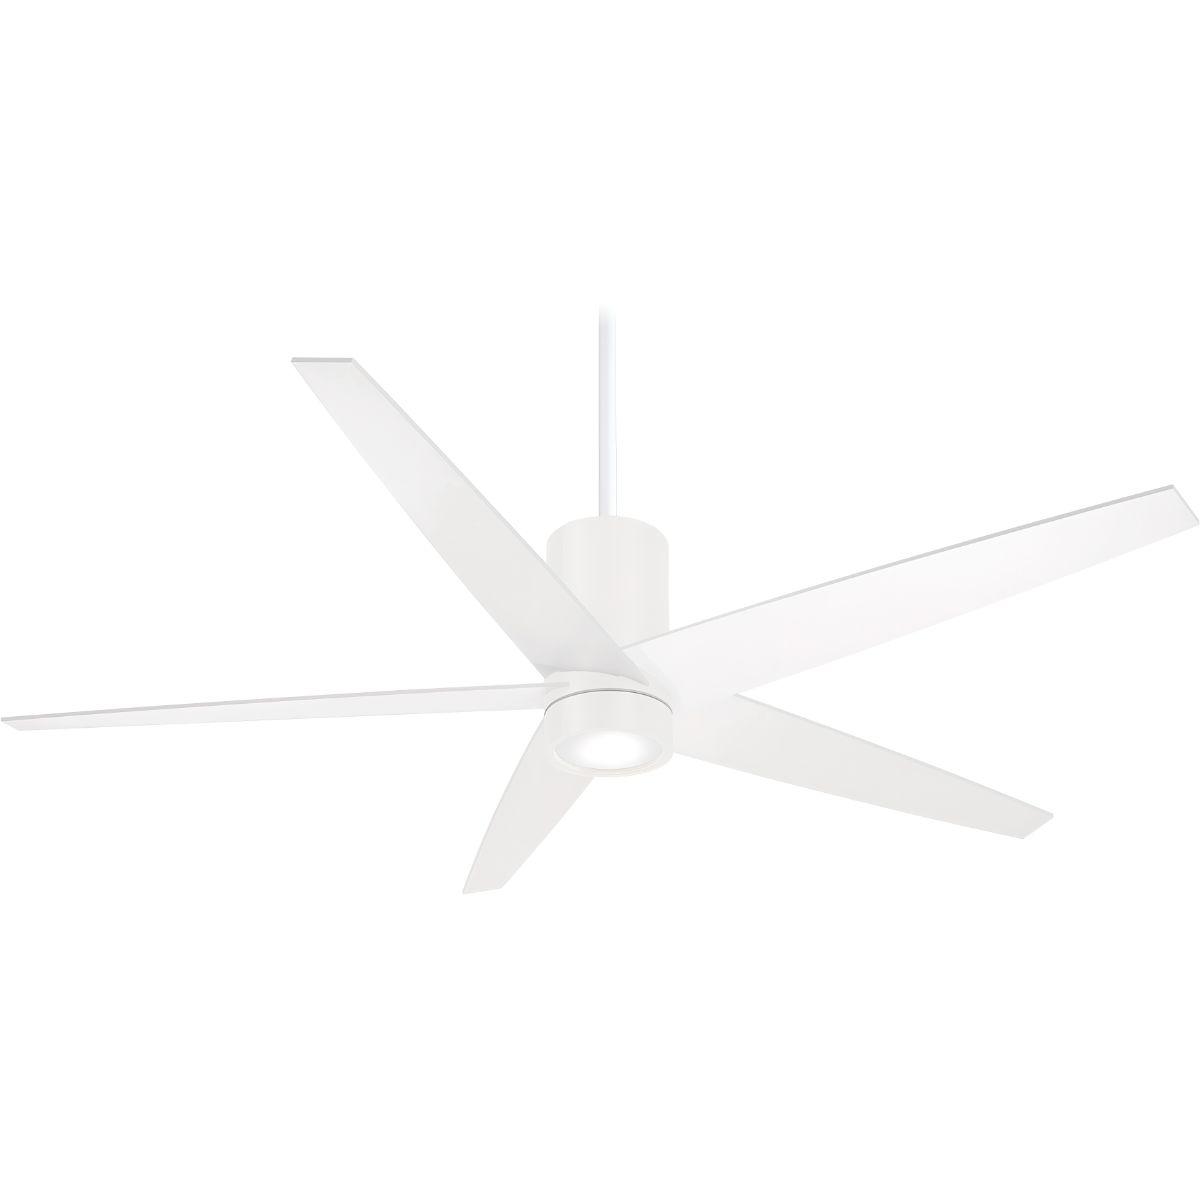 Symbio 56 Inch Modern Ceiling Fan With Light And Remote - Bees Lighting